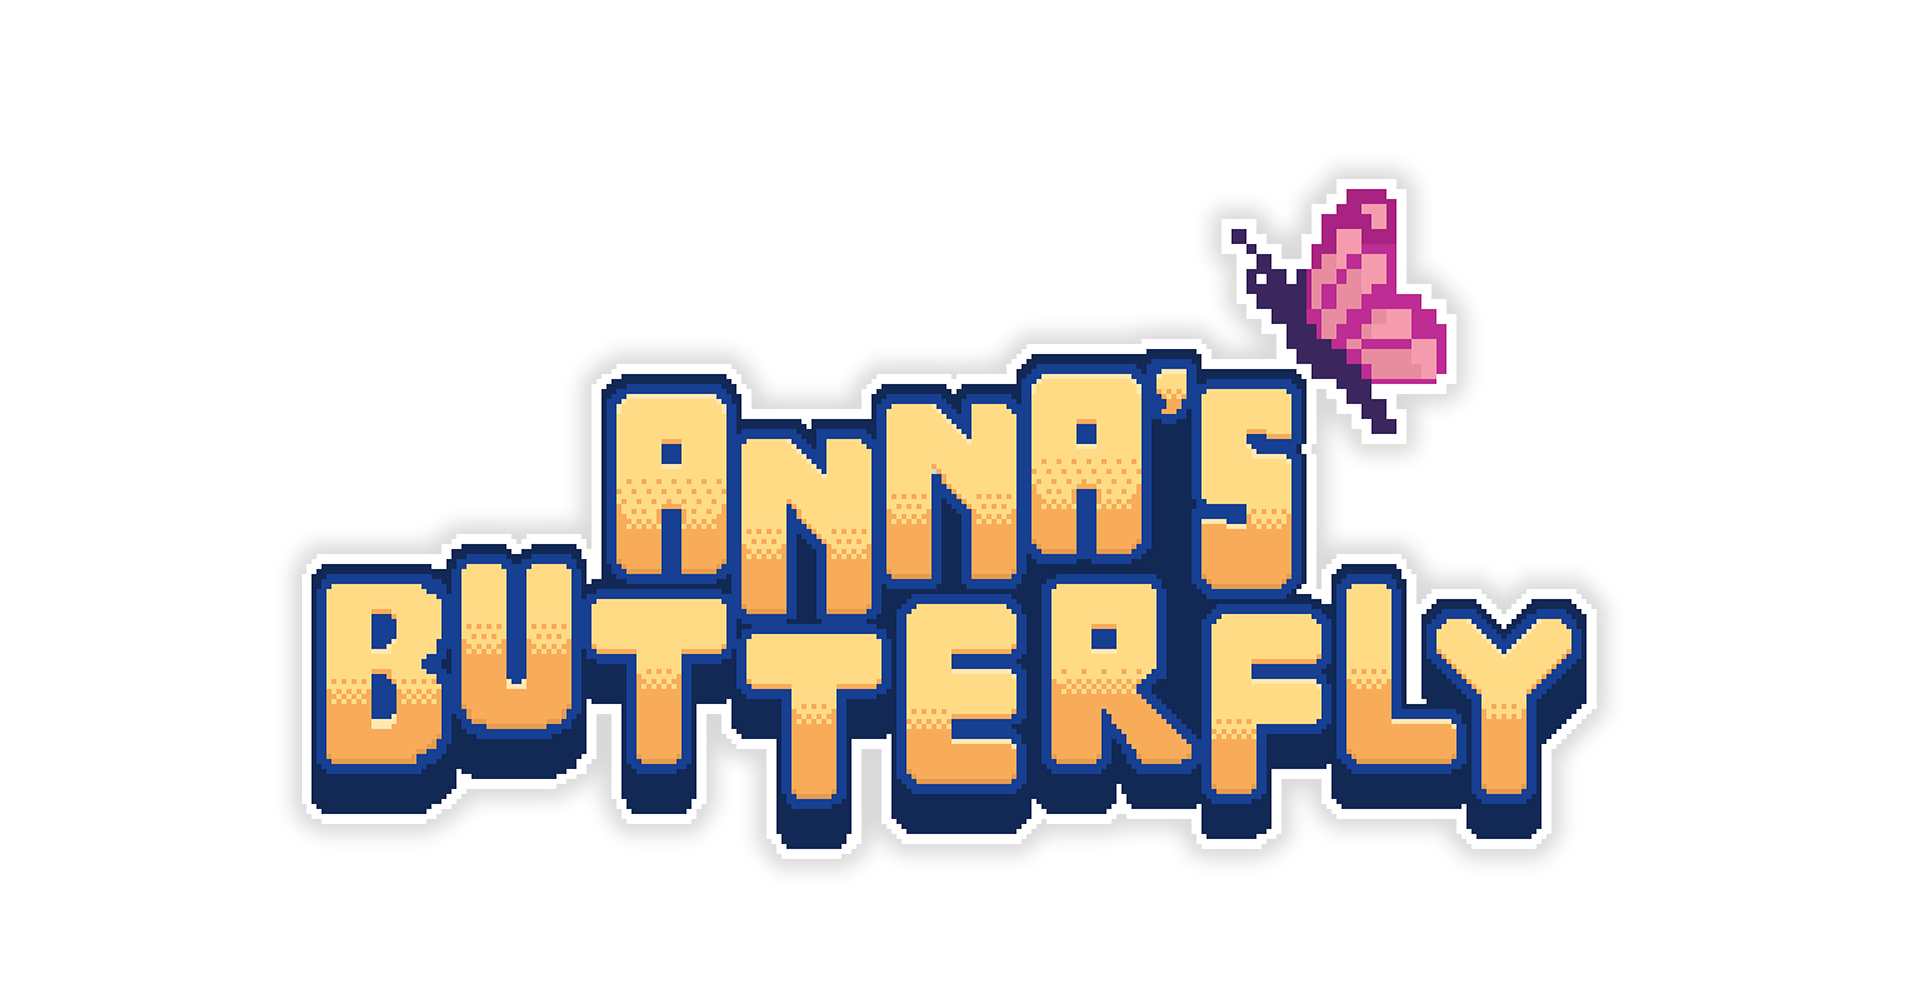 Anna's Butterfly